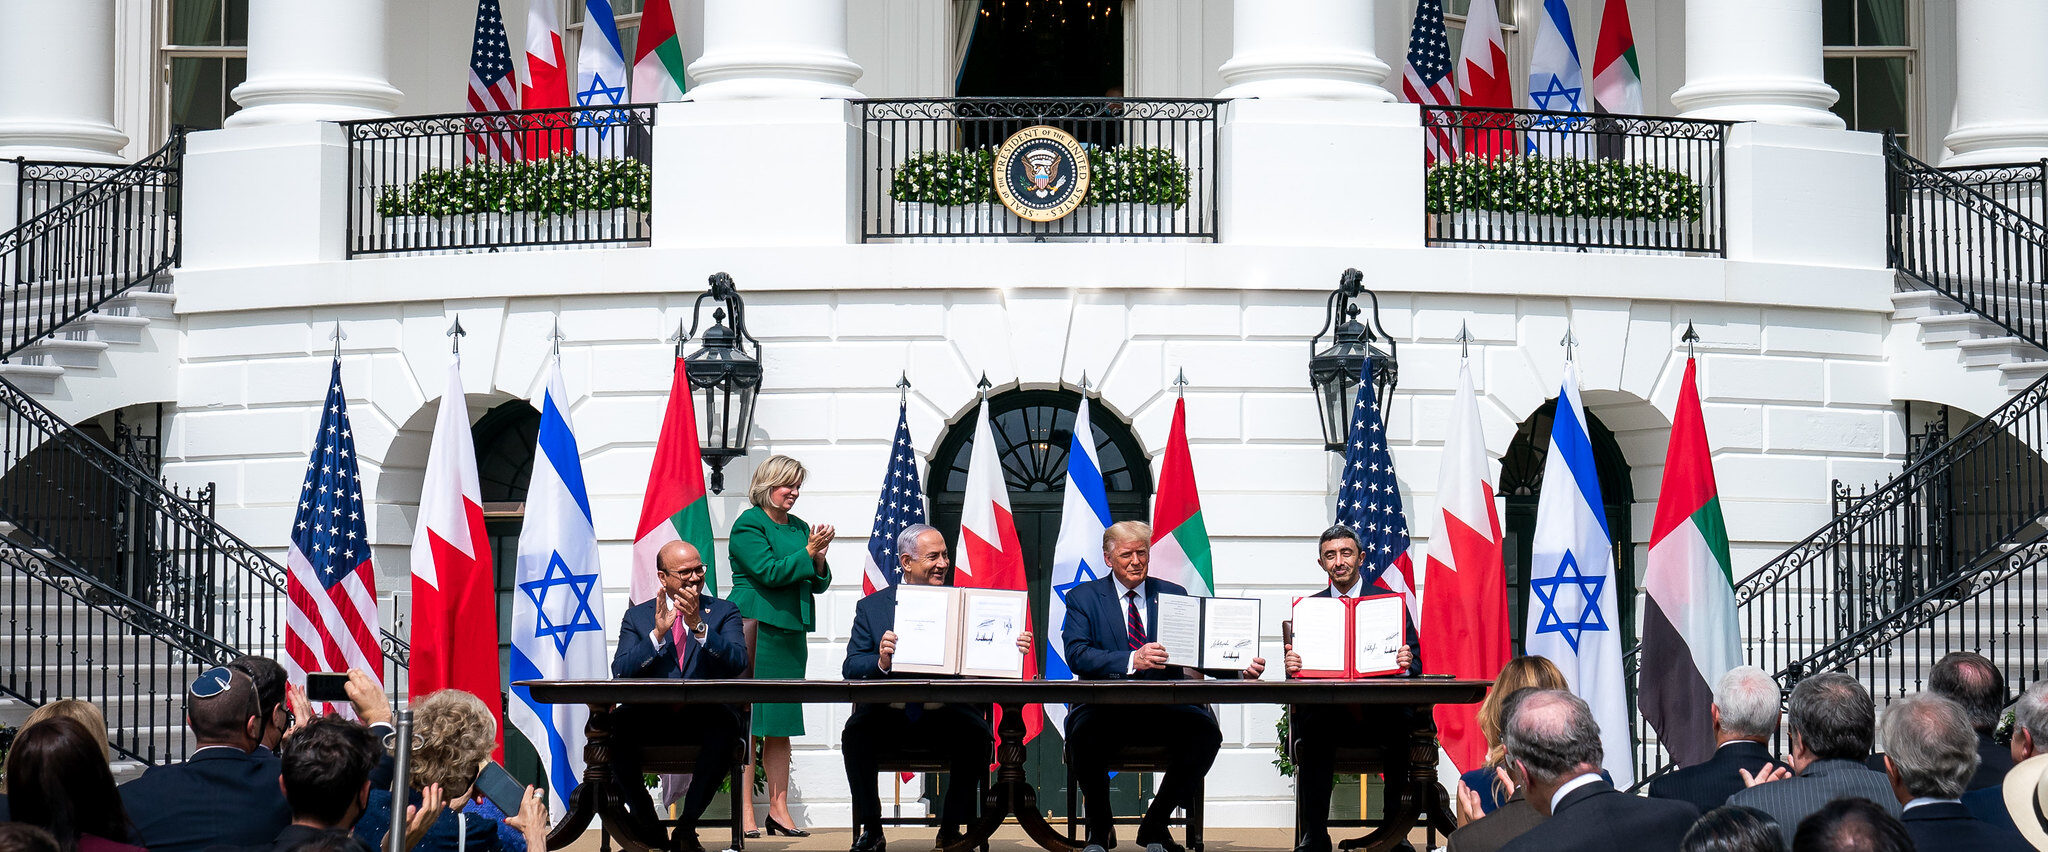 Abraham Accords-US, UAE, Israel, Bahrain Recognition Agreements